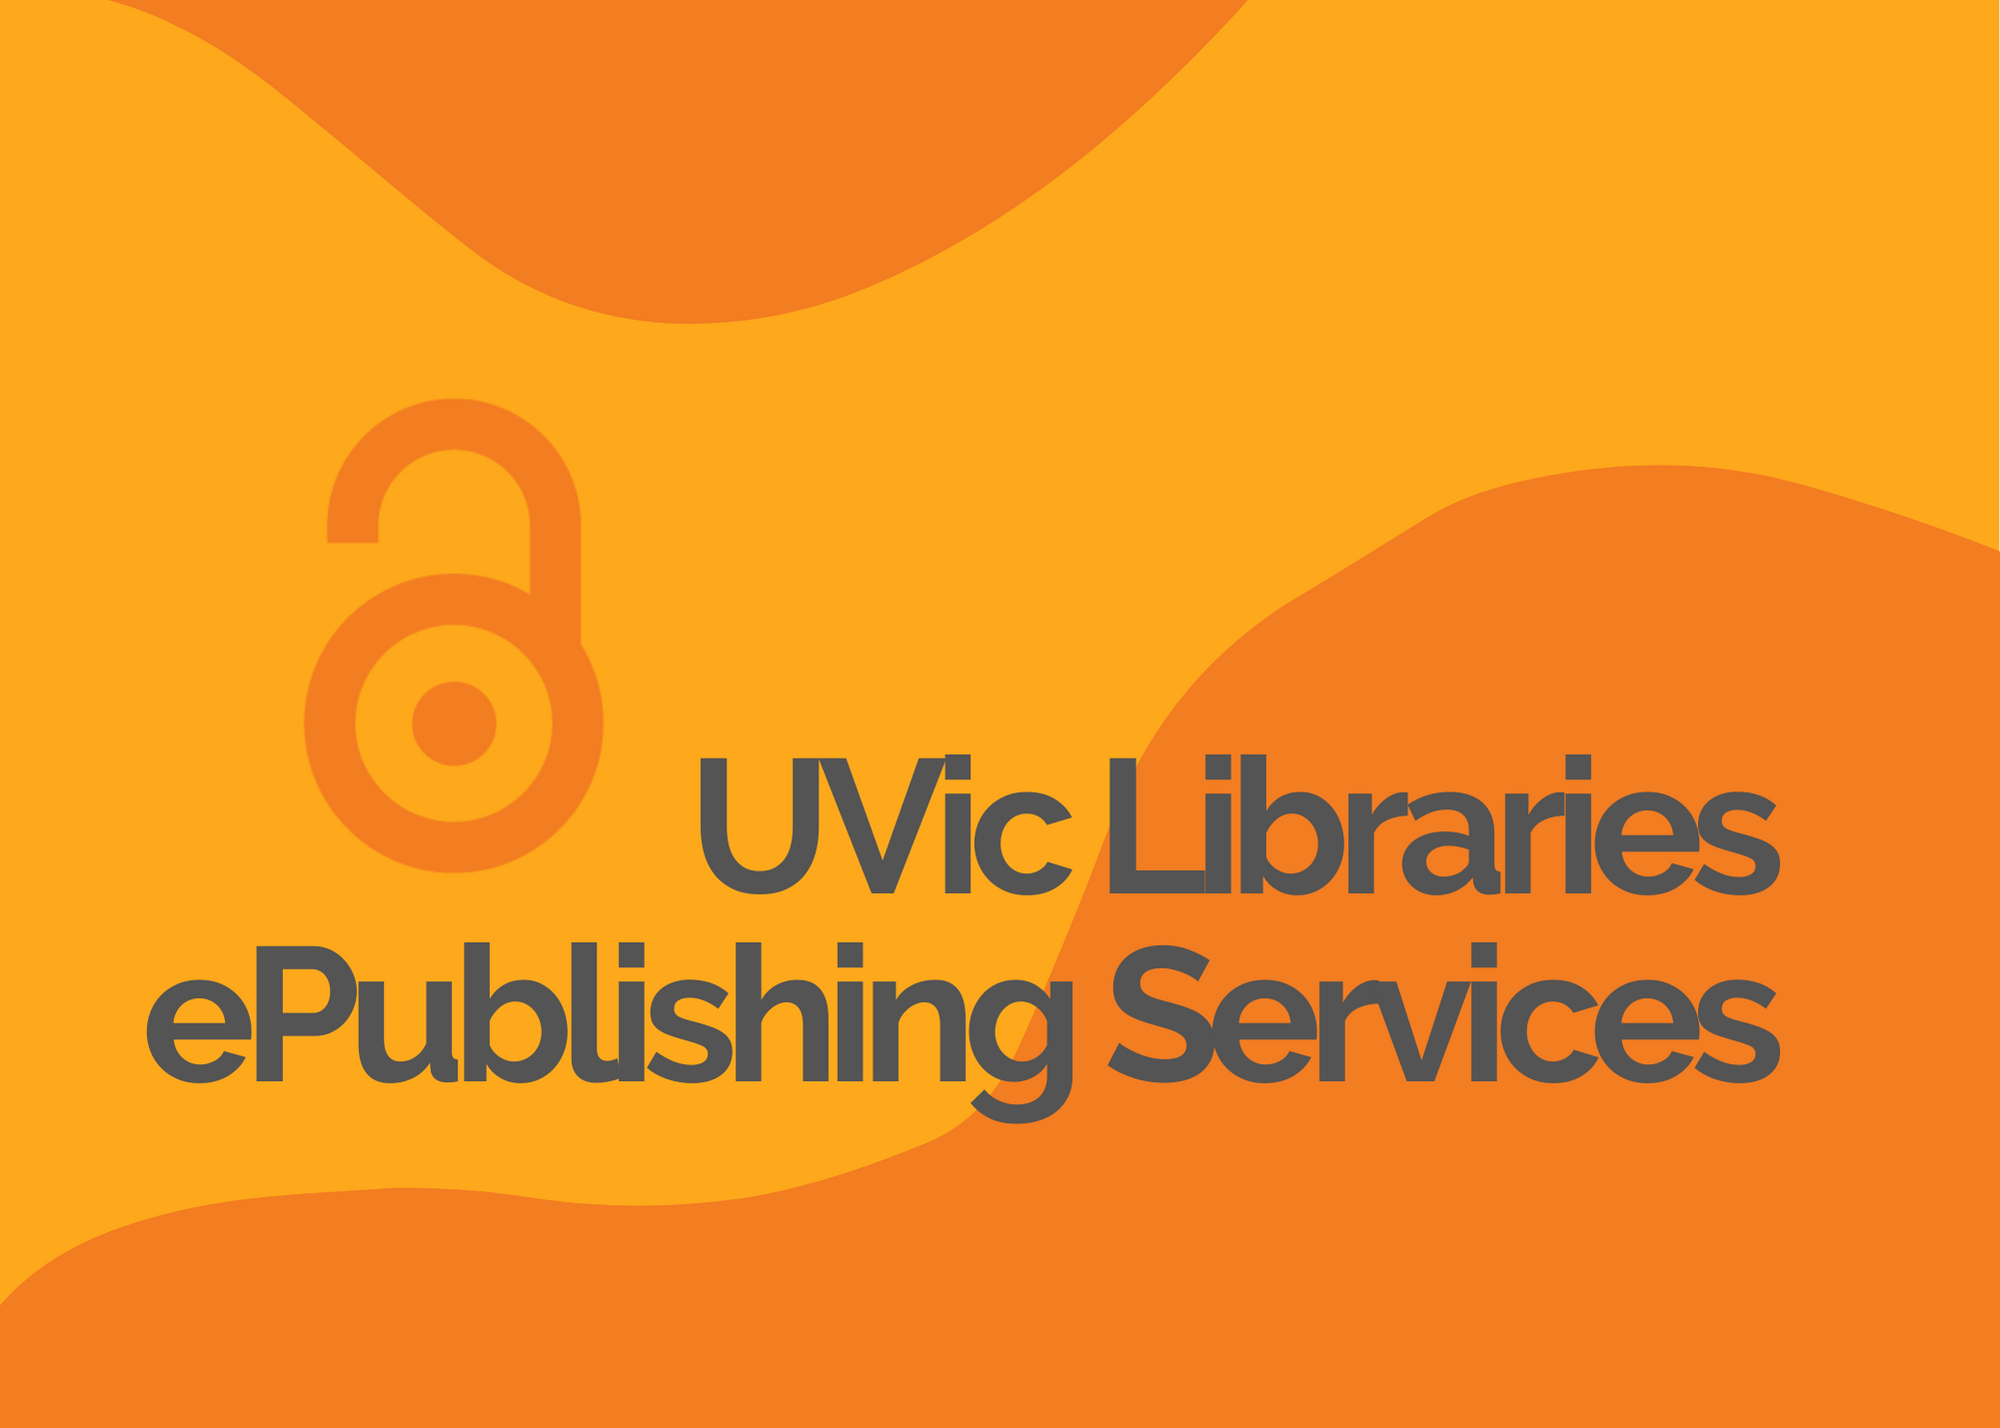 Welcome to University of Victoria Libraries ePublishing Services for scholarly publishing